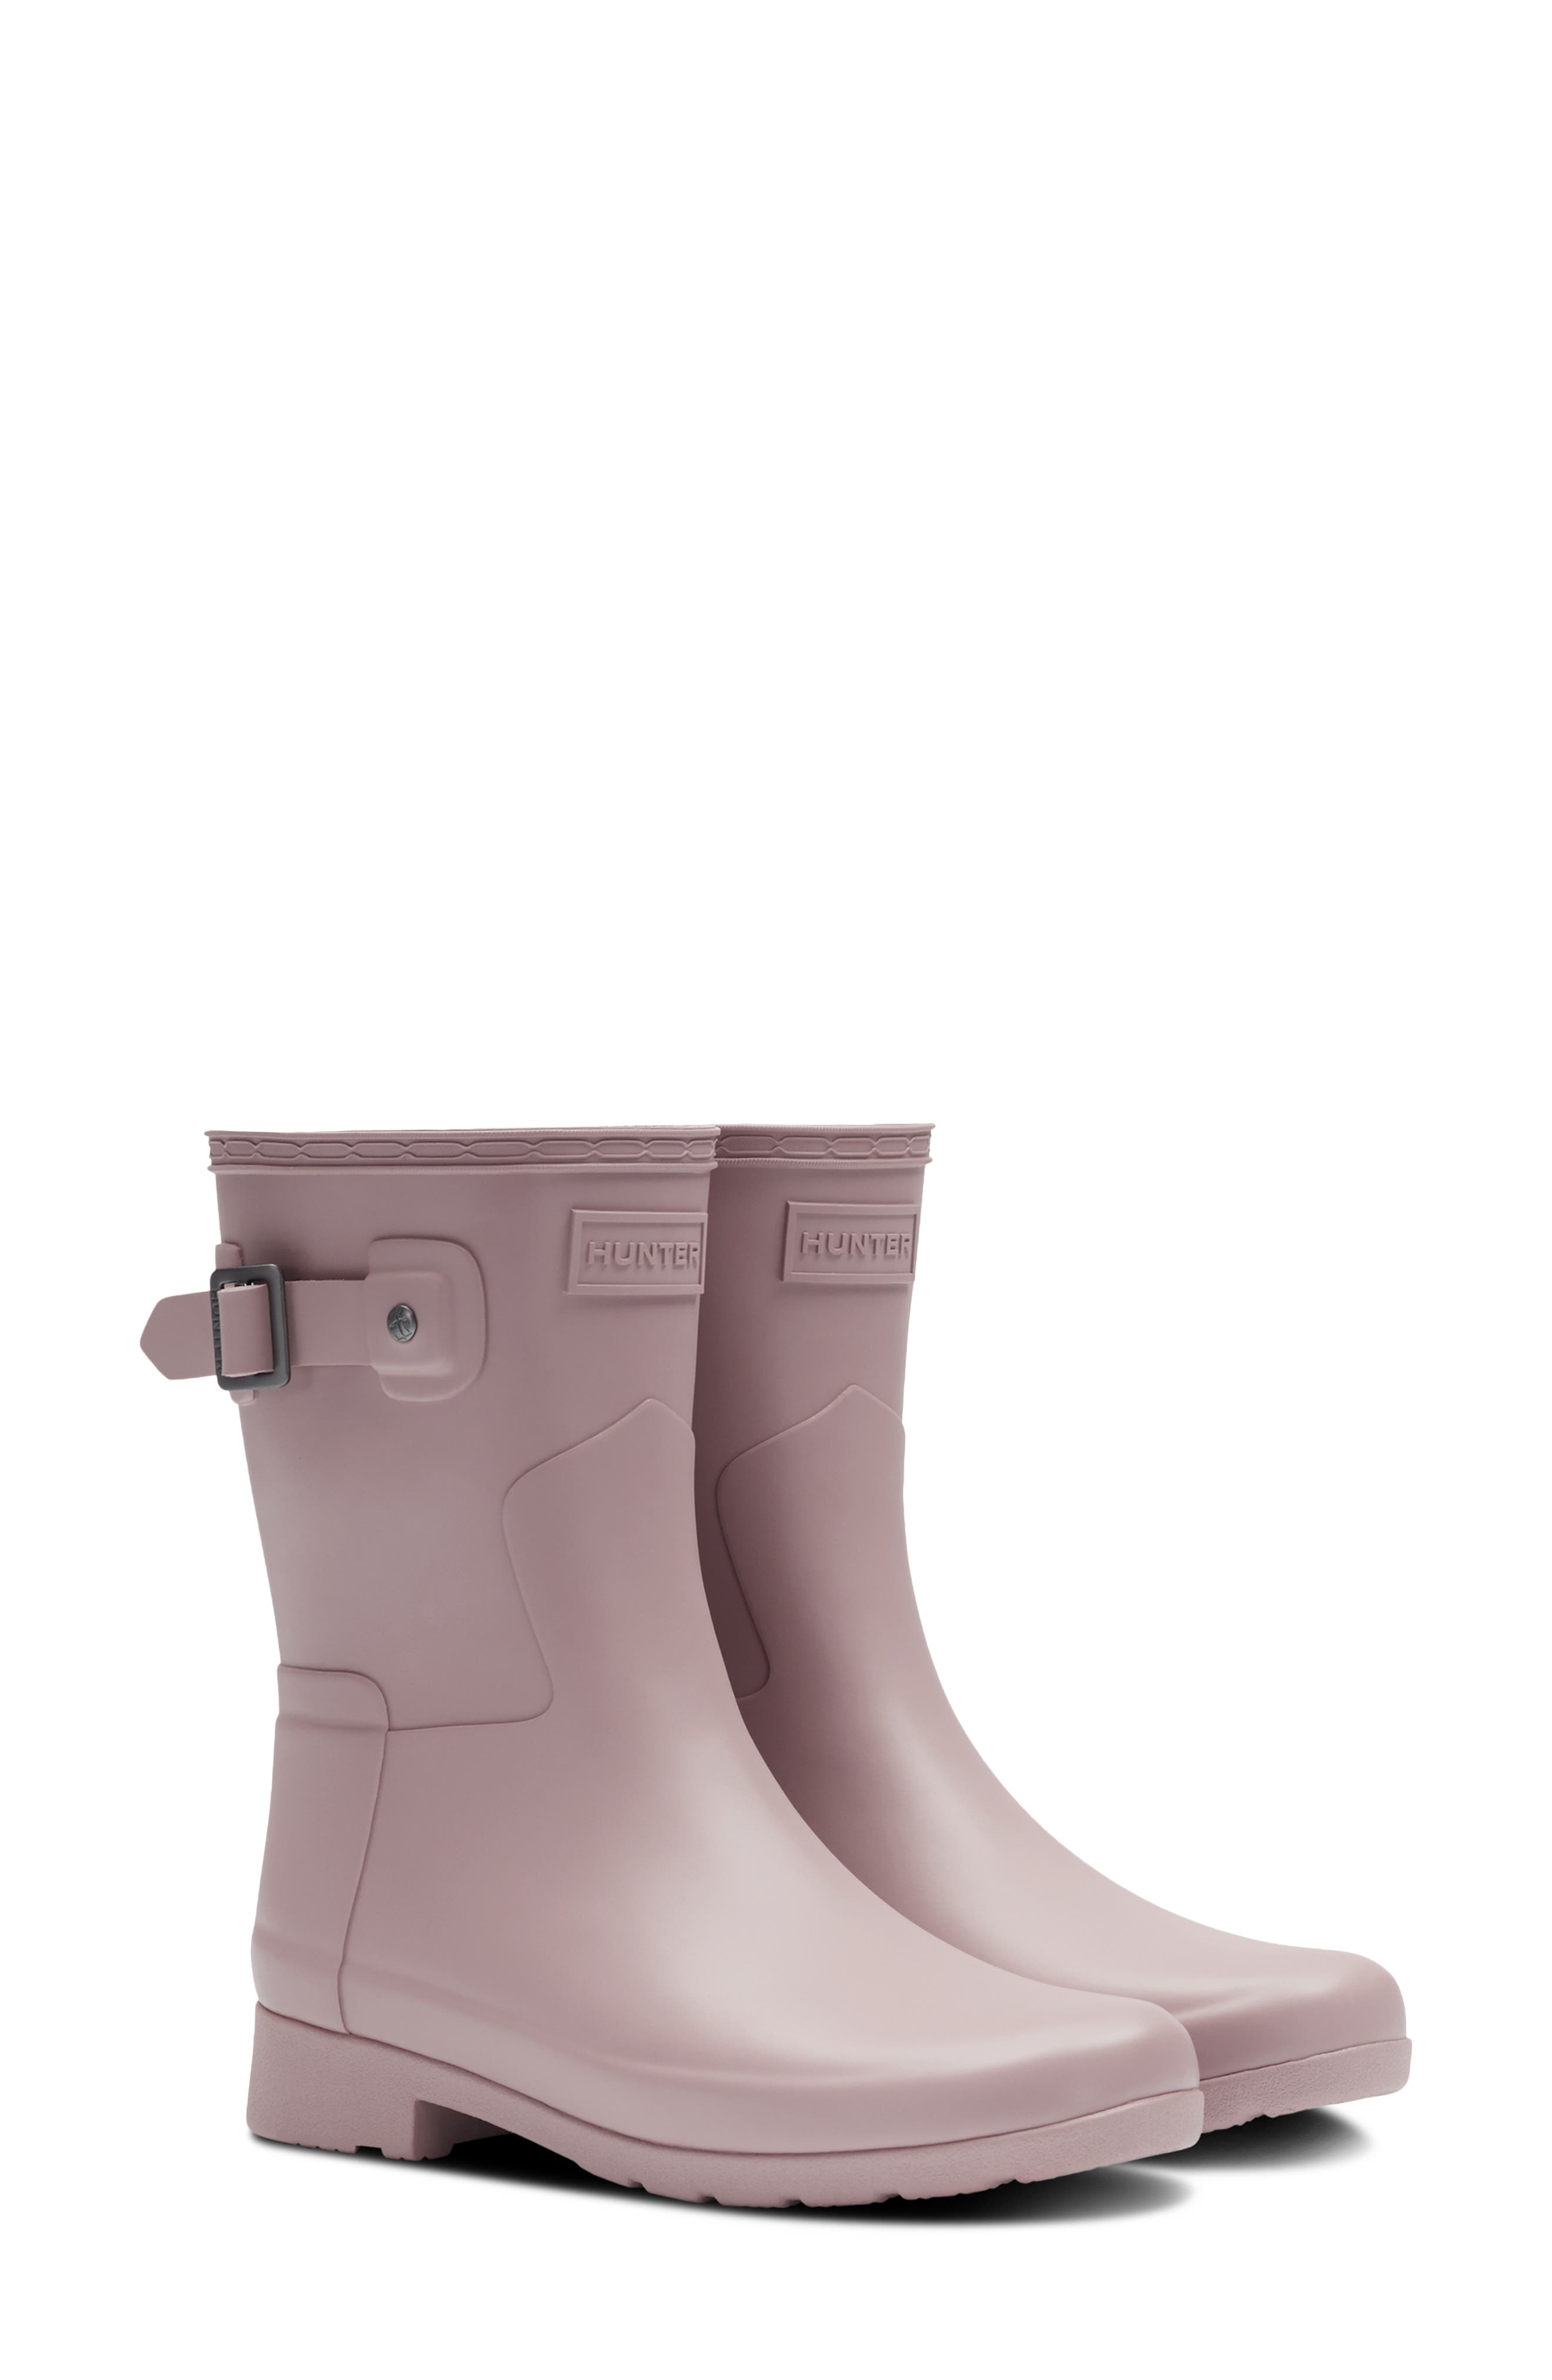 nordstrom pink boots